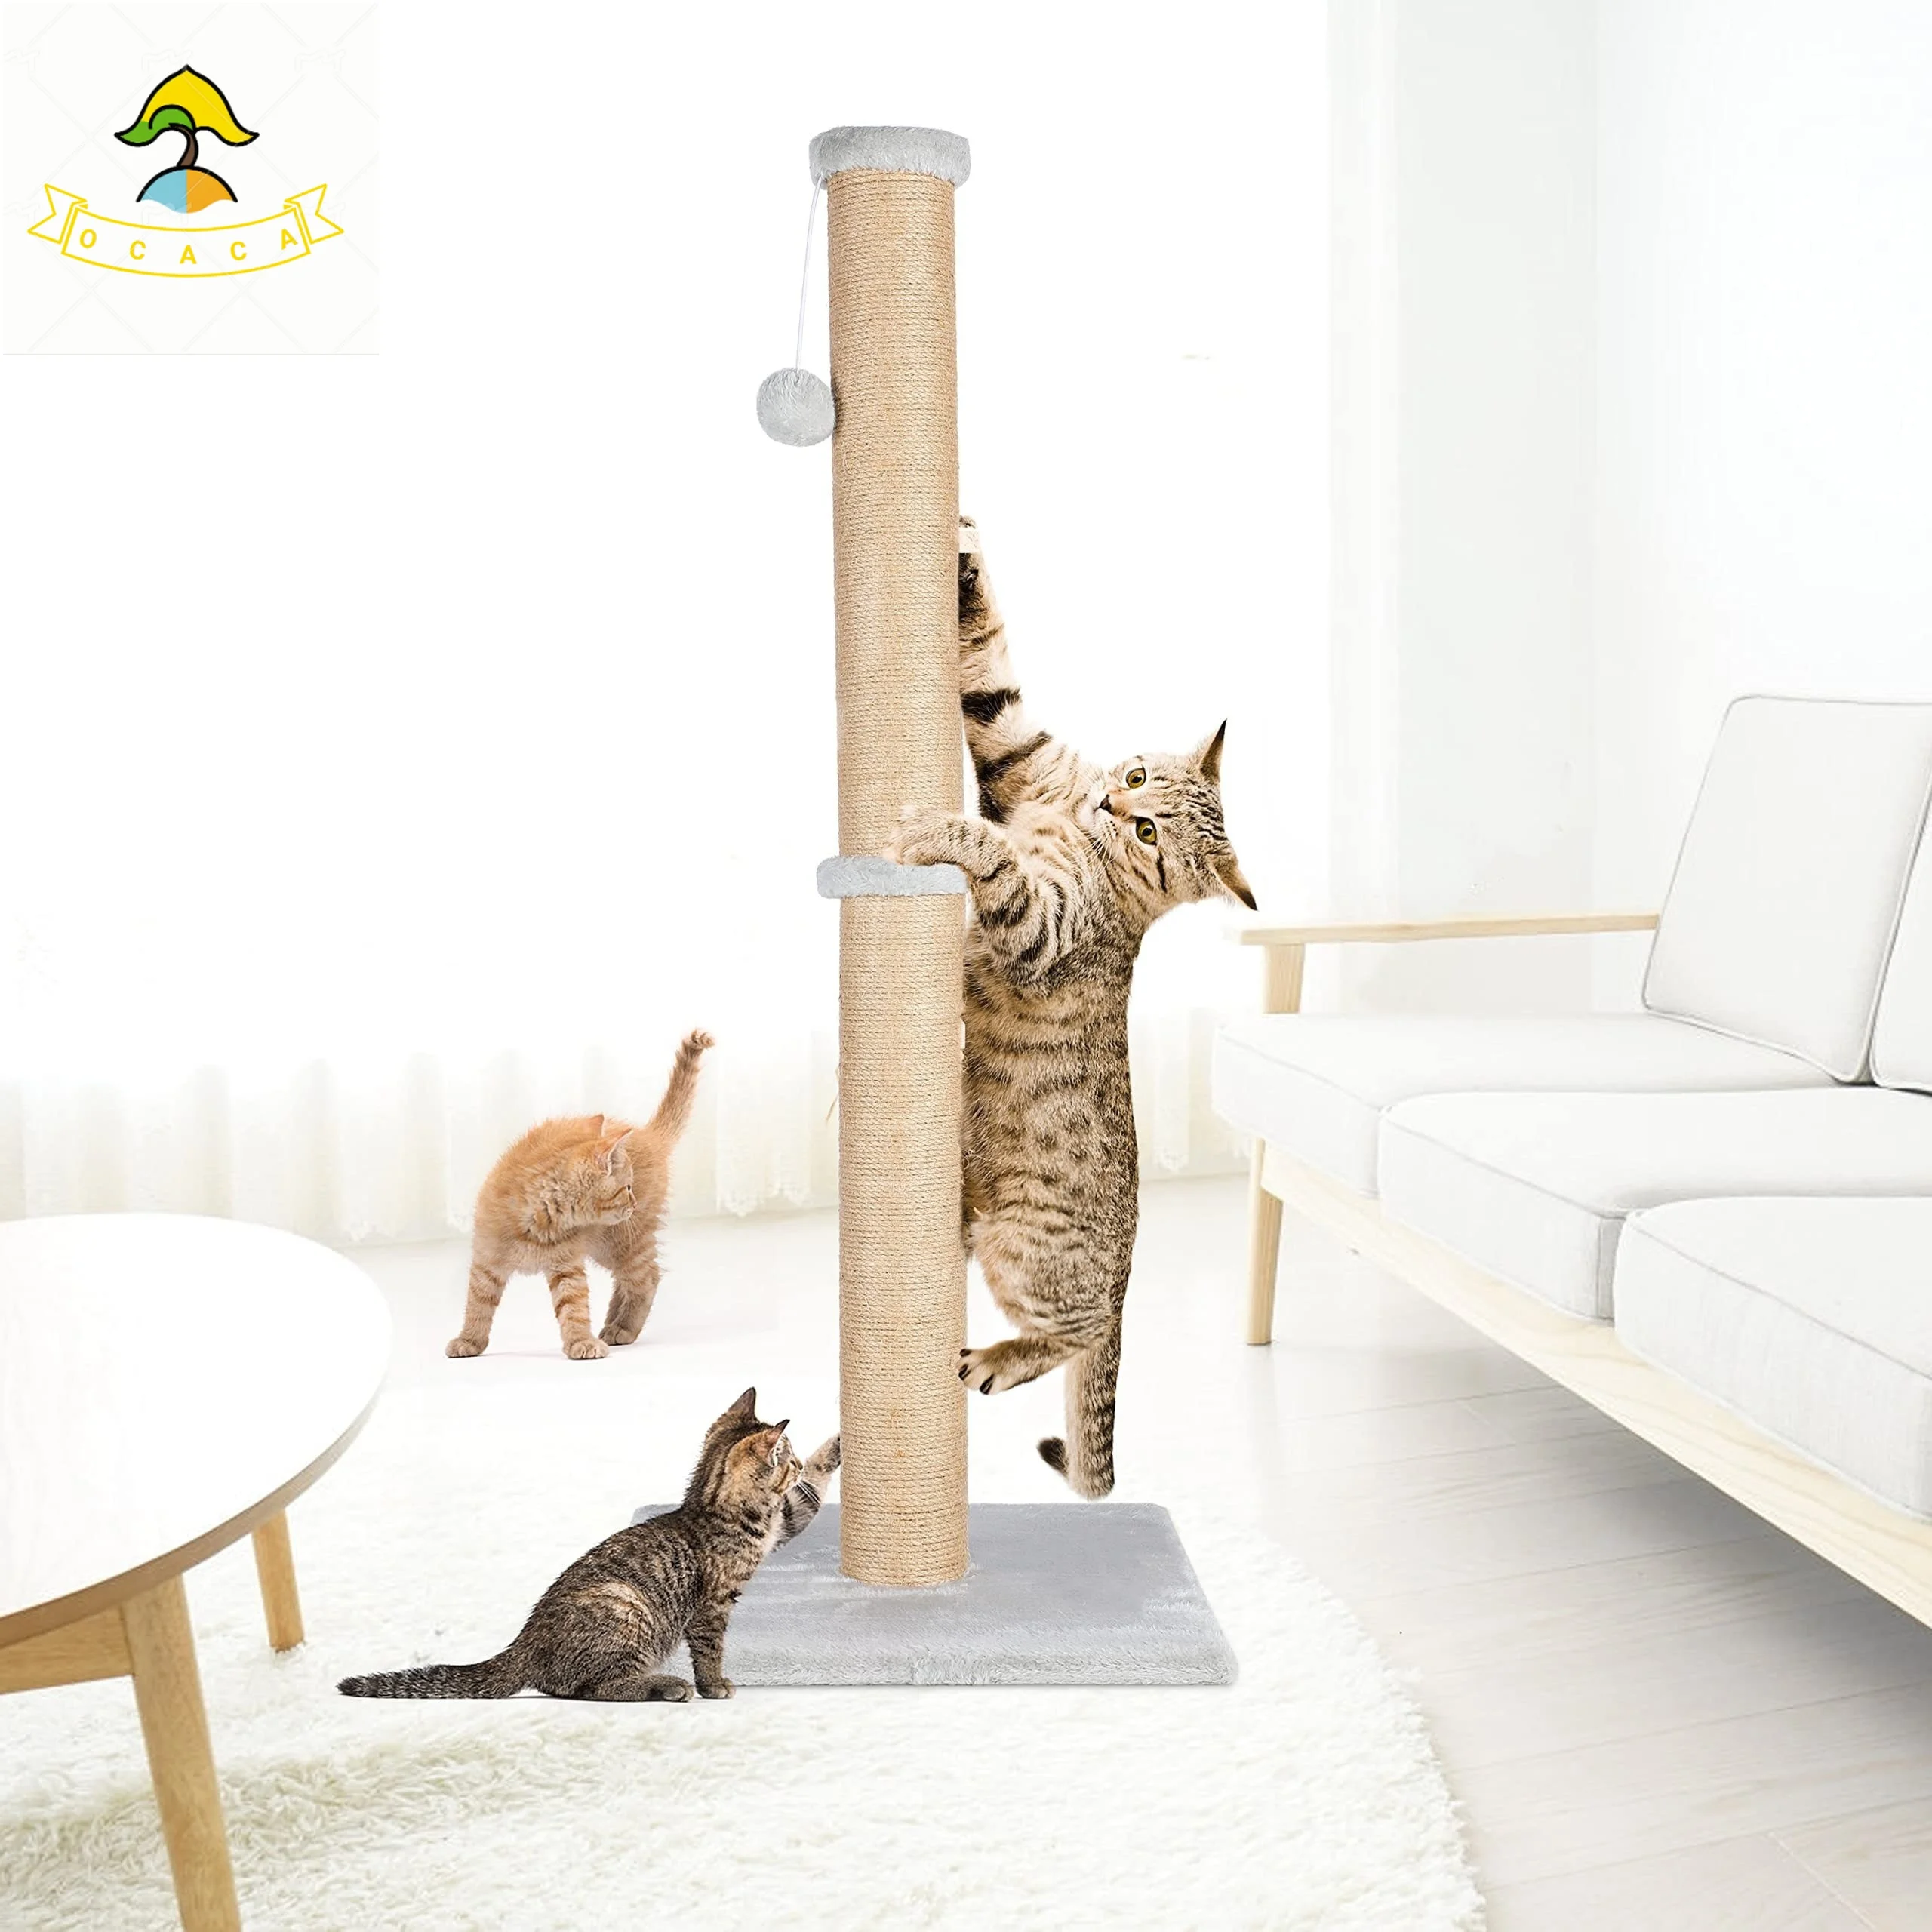 

37'' Cat Scratching Post, Natural Sisal Rope Scratcher With Dangling Teaser Ball And Covered With Soft Plush For Kittens And Adu